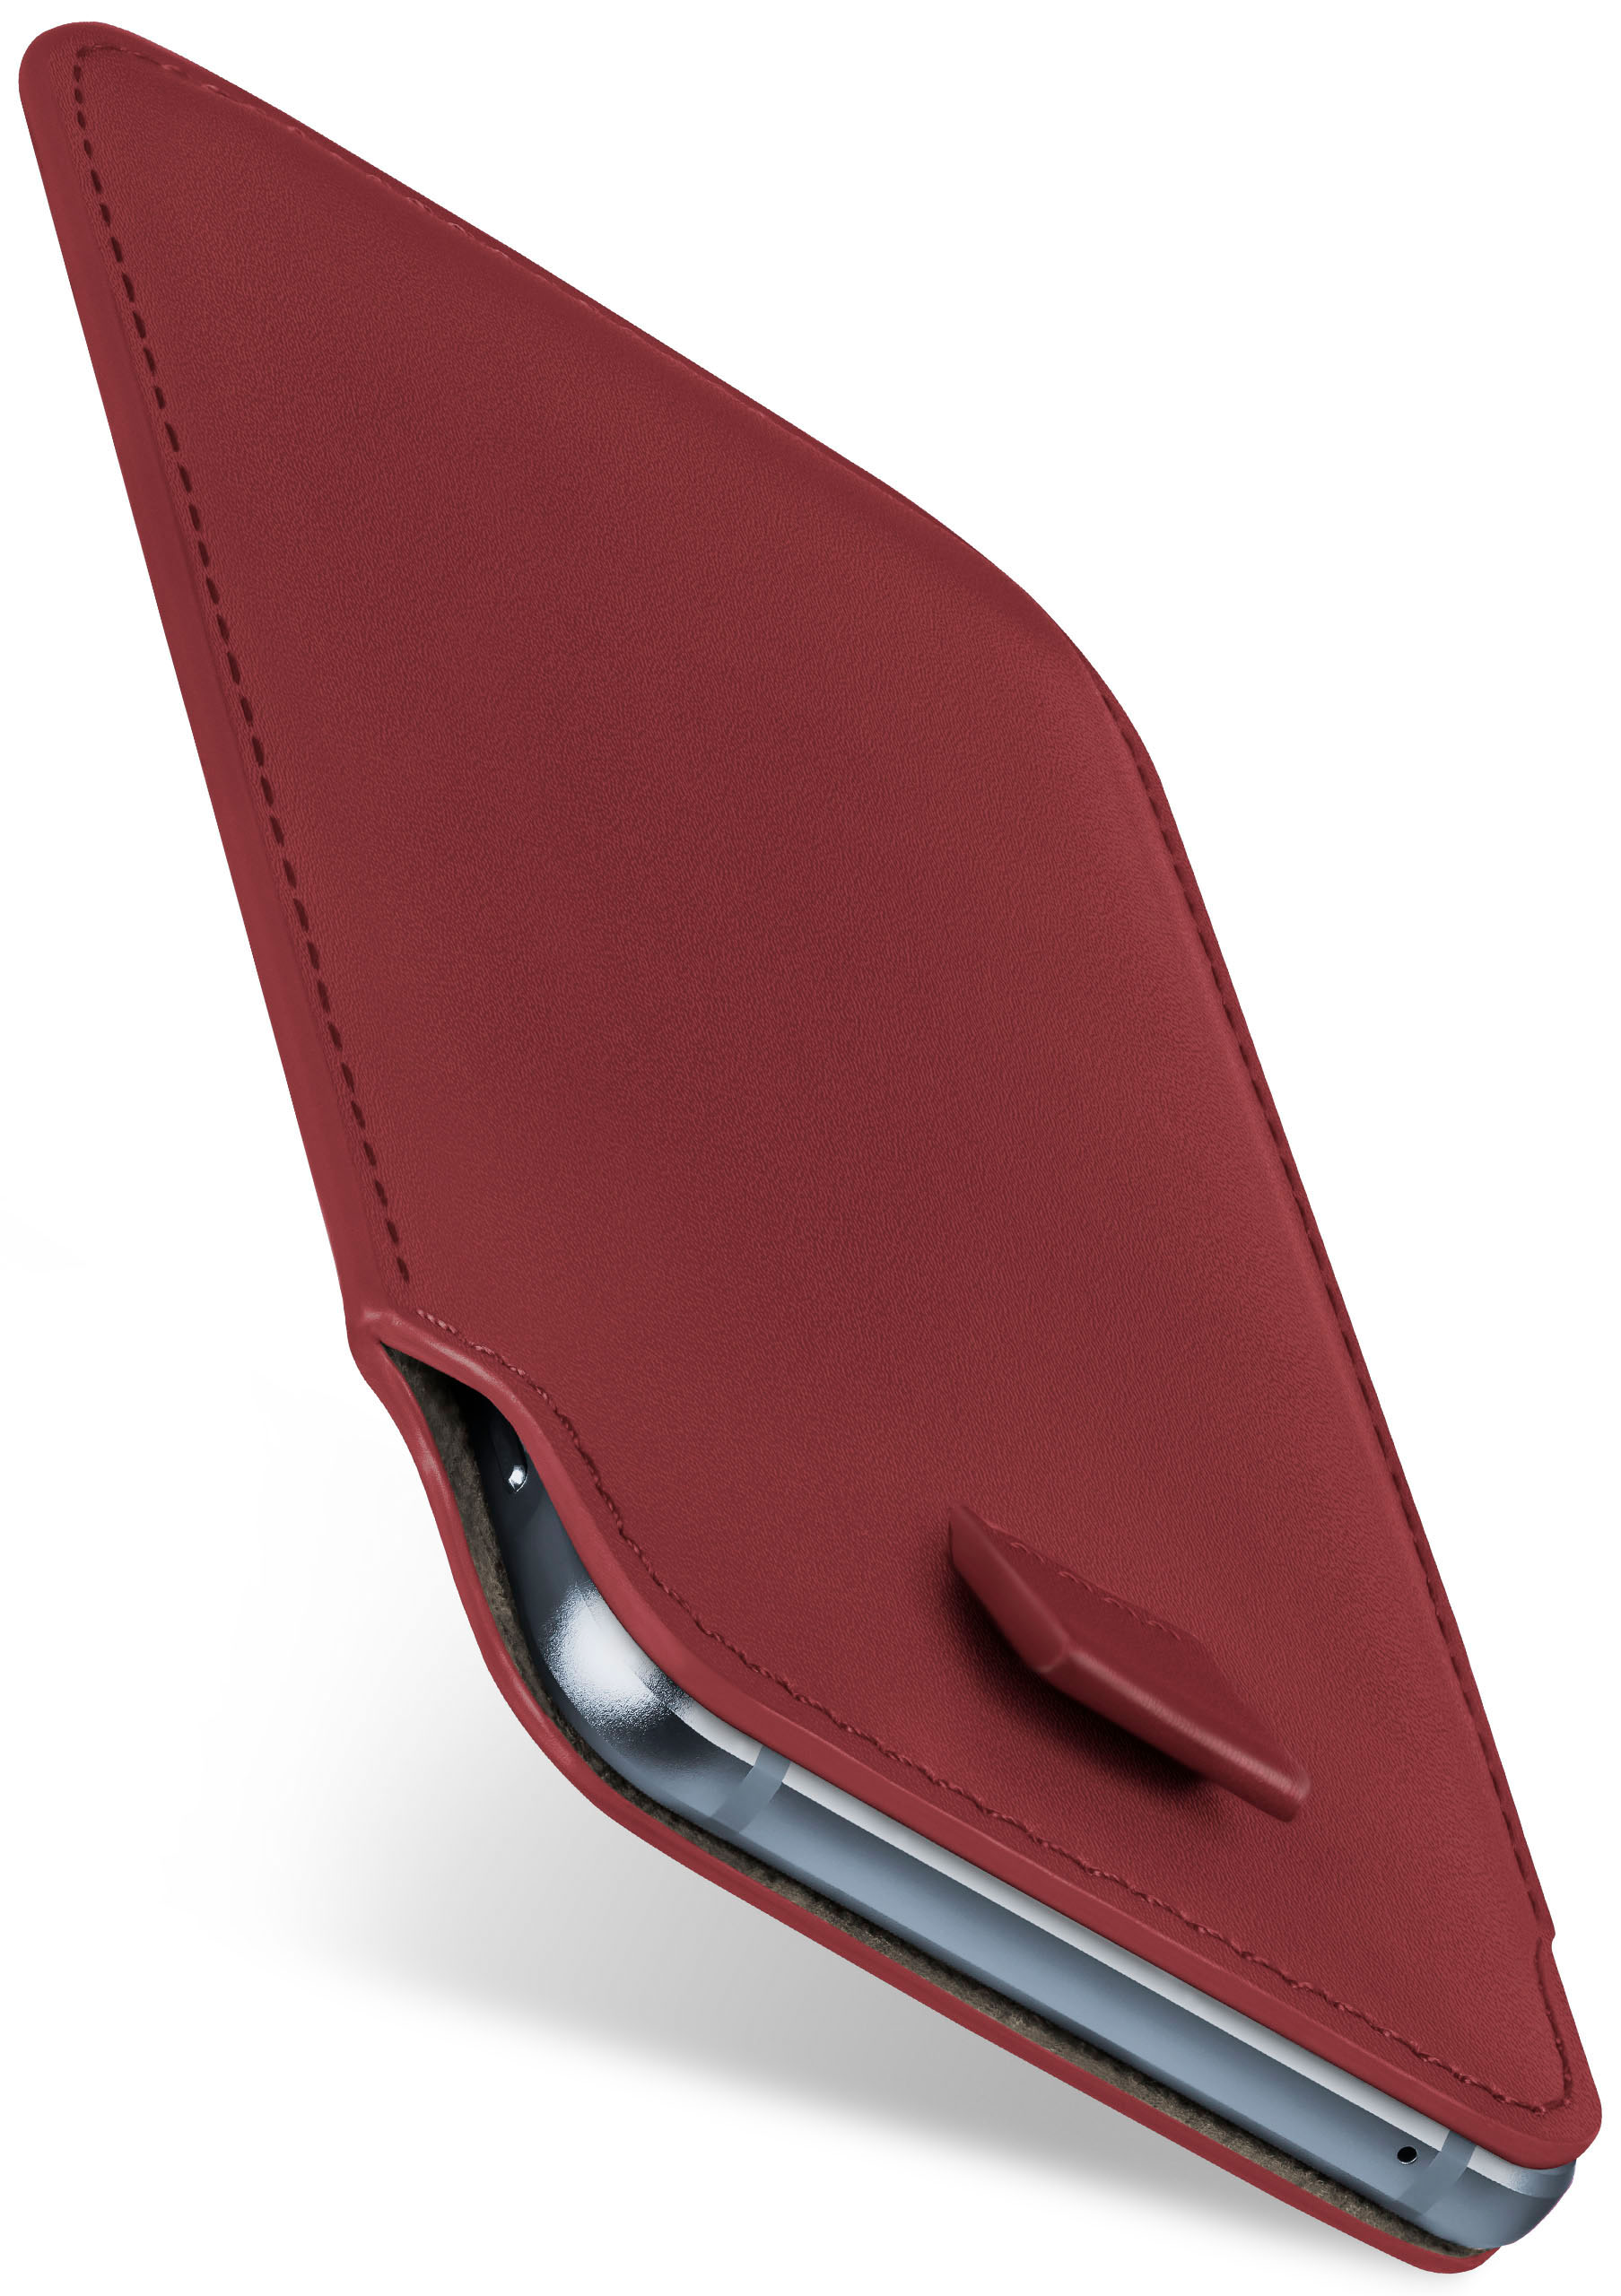 One Slide HTC, Full M7, Maroon-Red Case, Cover, MOEX